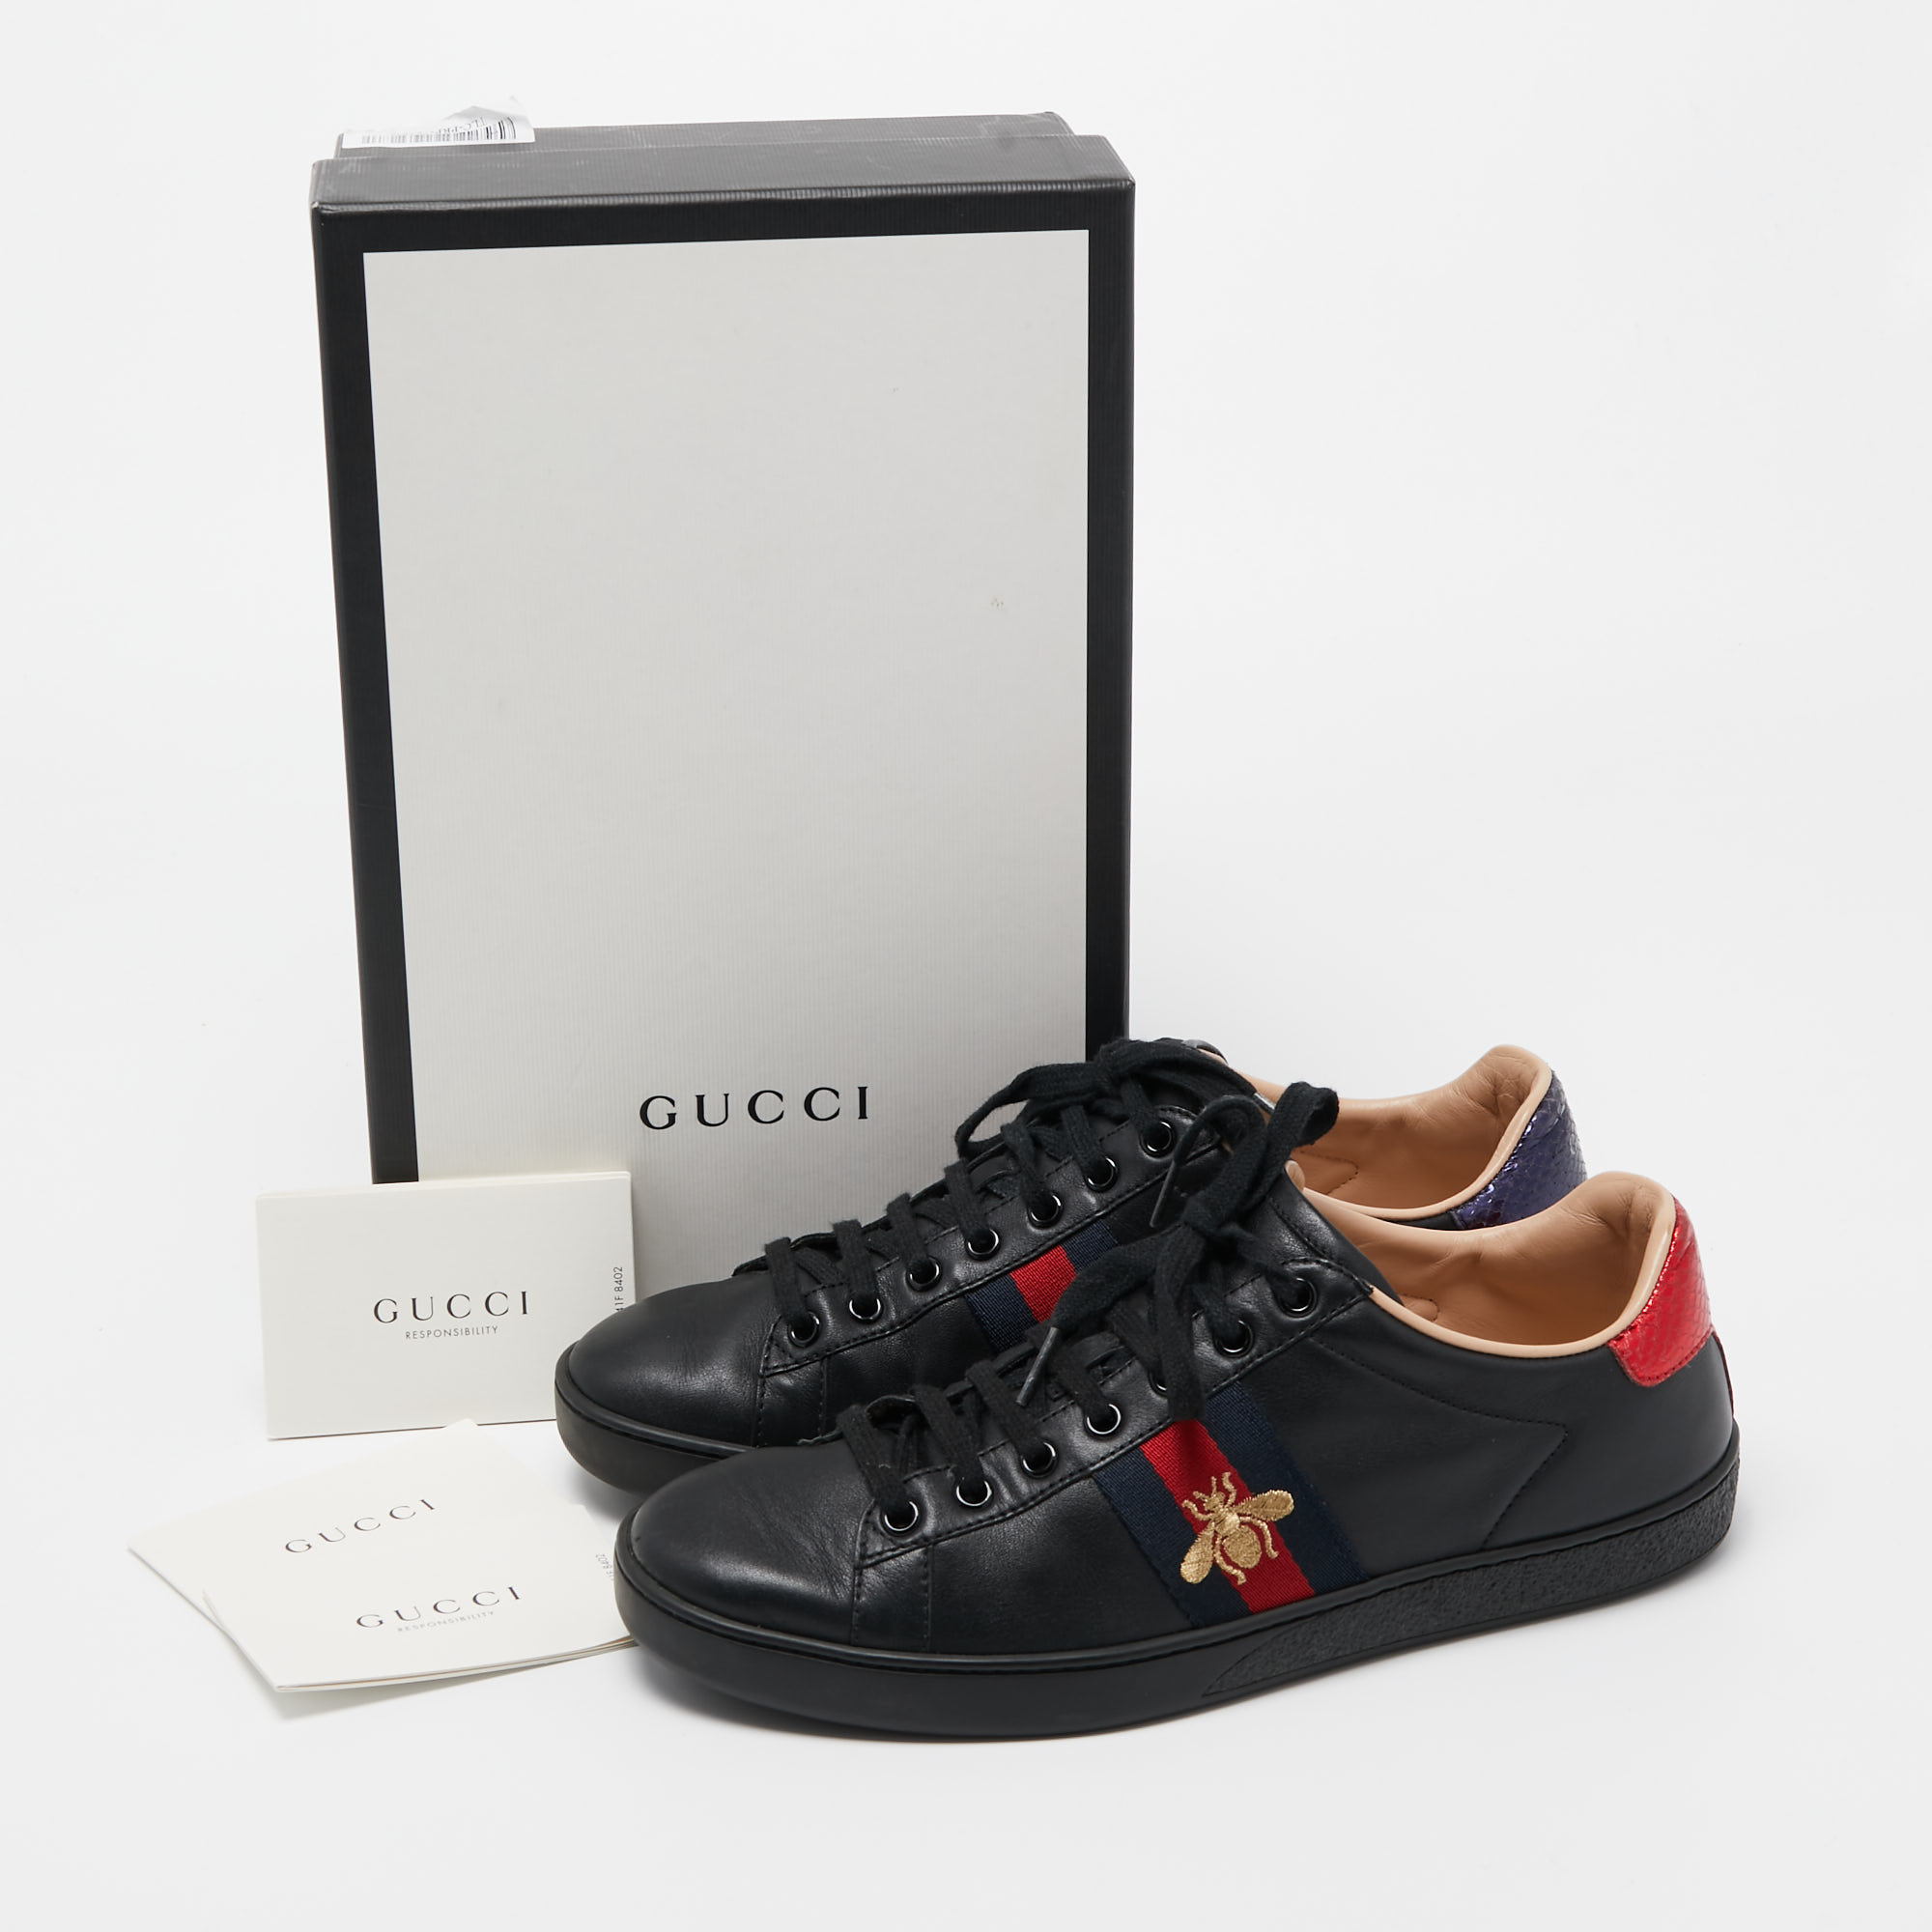 Gucci Black Leather Ace Web Low Top Sneakers Size 38.5